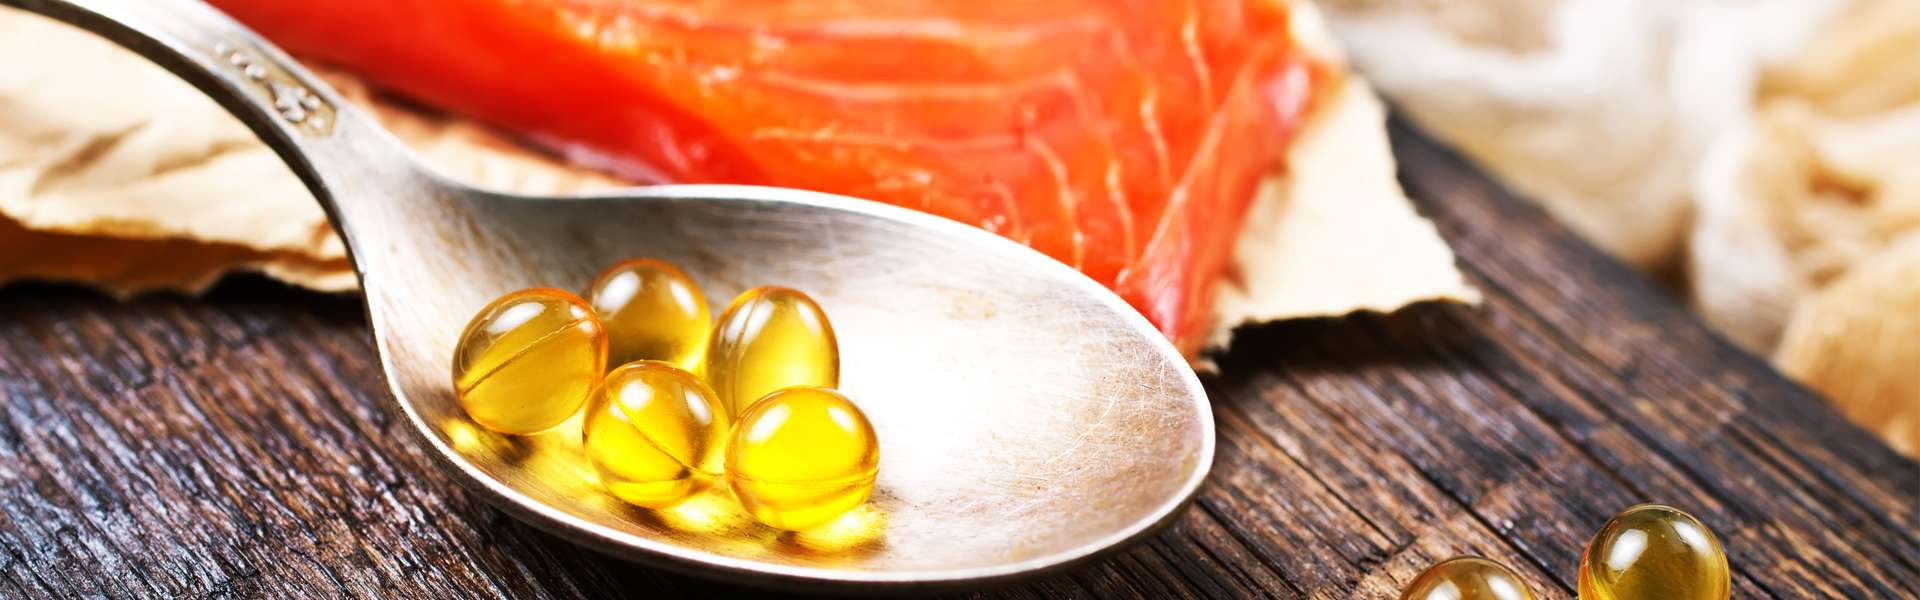 Fish oil: Does it work? Properties and efficacy, dosage and method of use